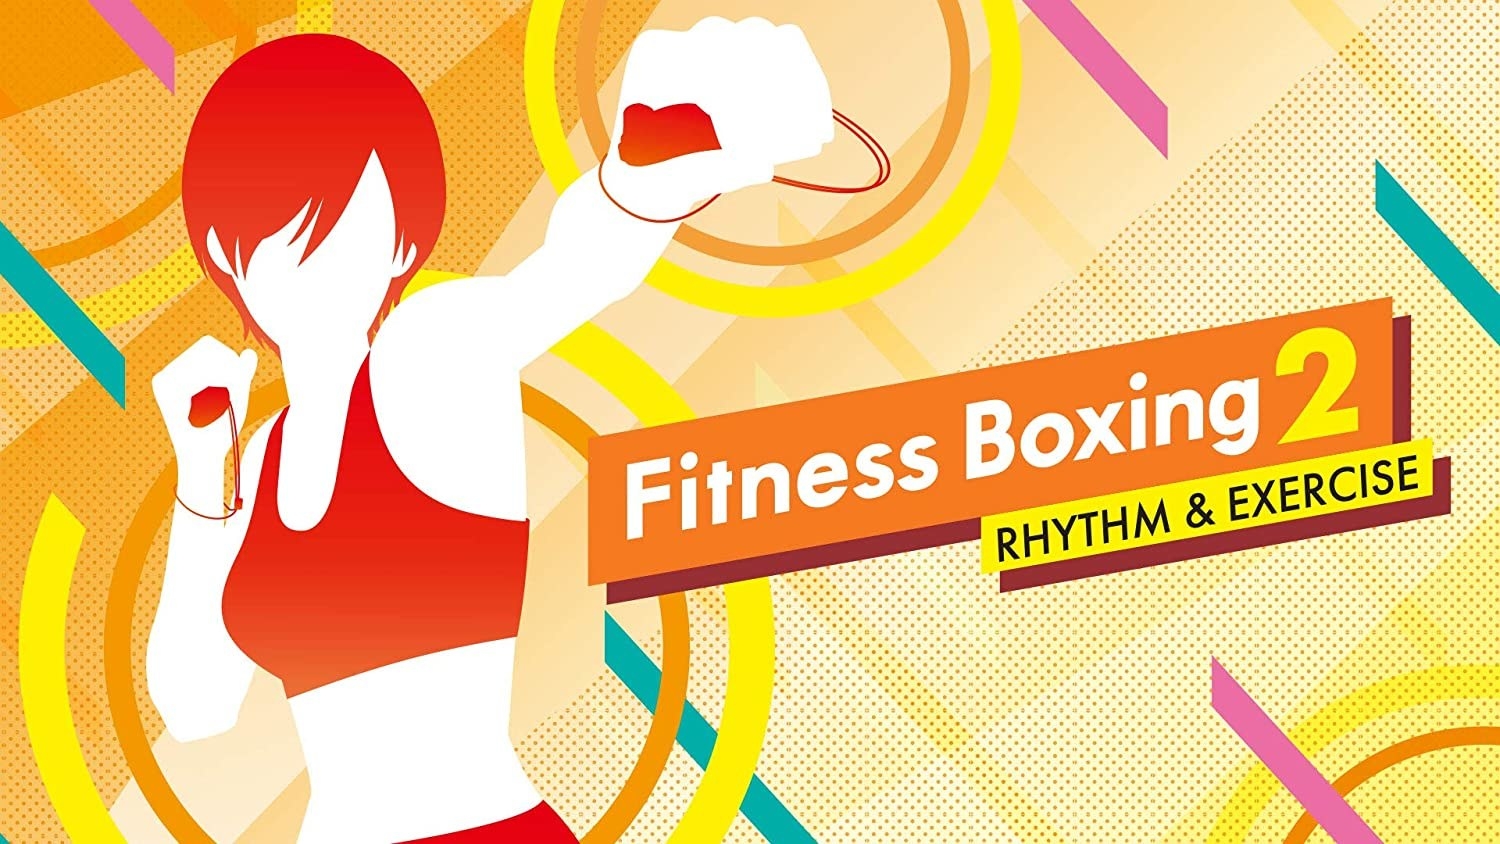 the advertisement for fitness boxing 2